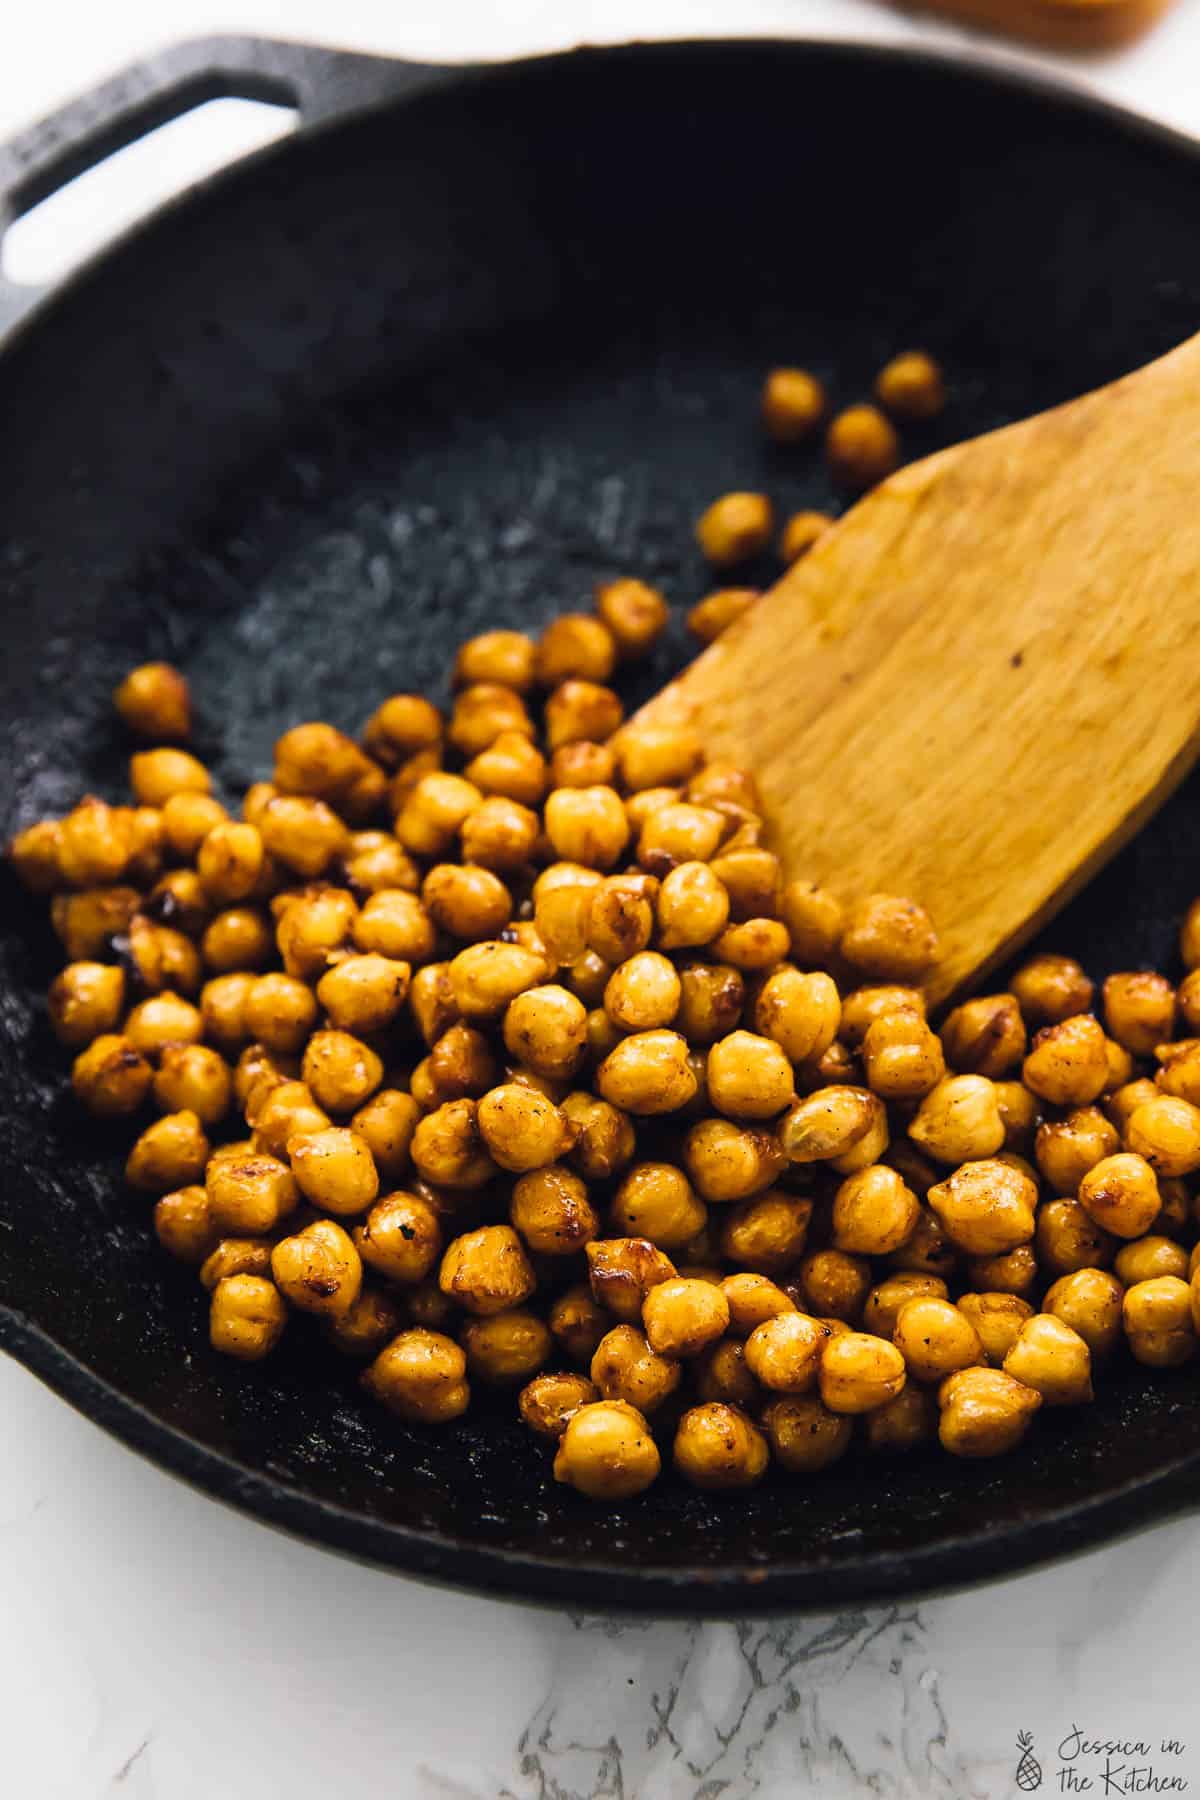 BBQ chickpeas in cast iron skillet with wooden spatula